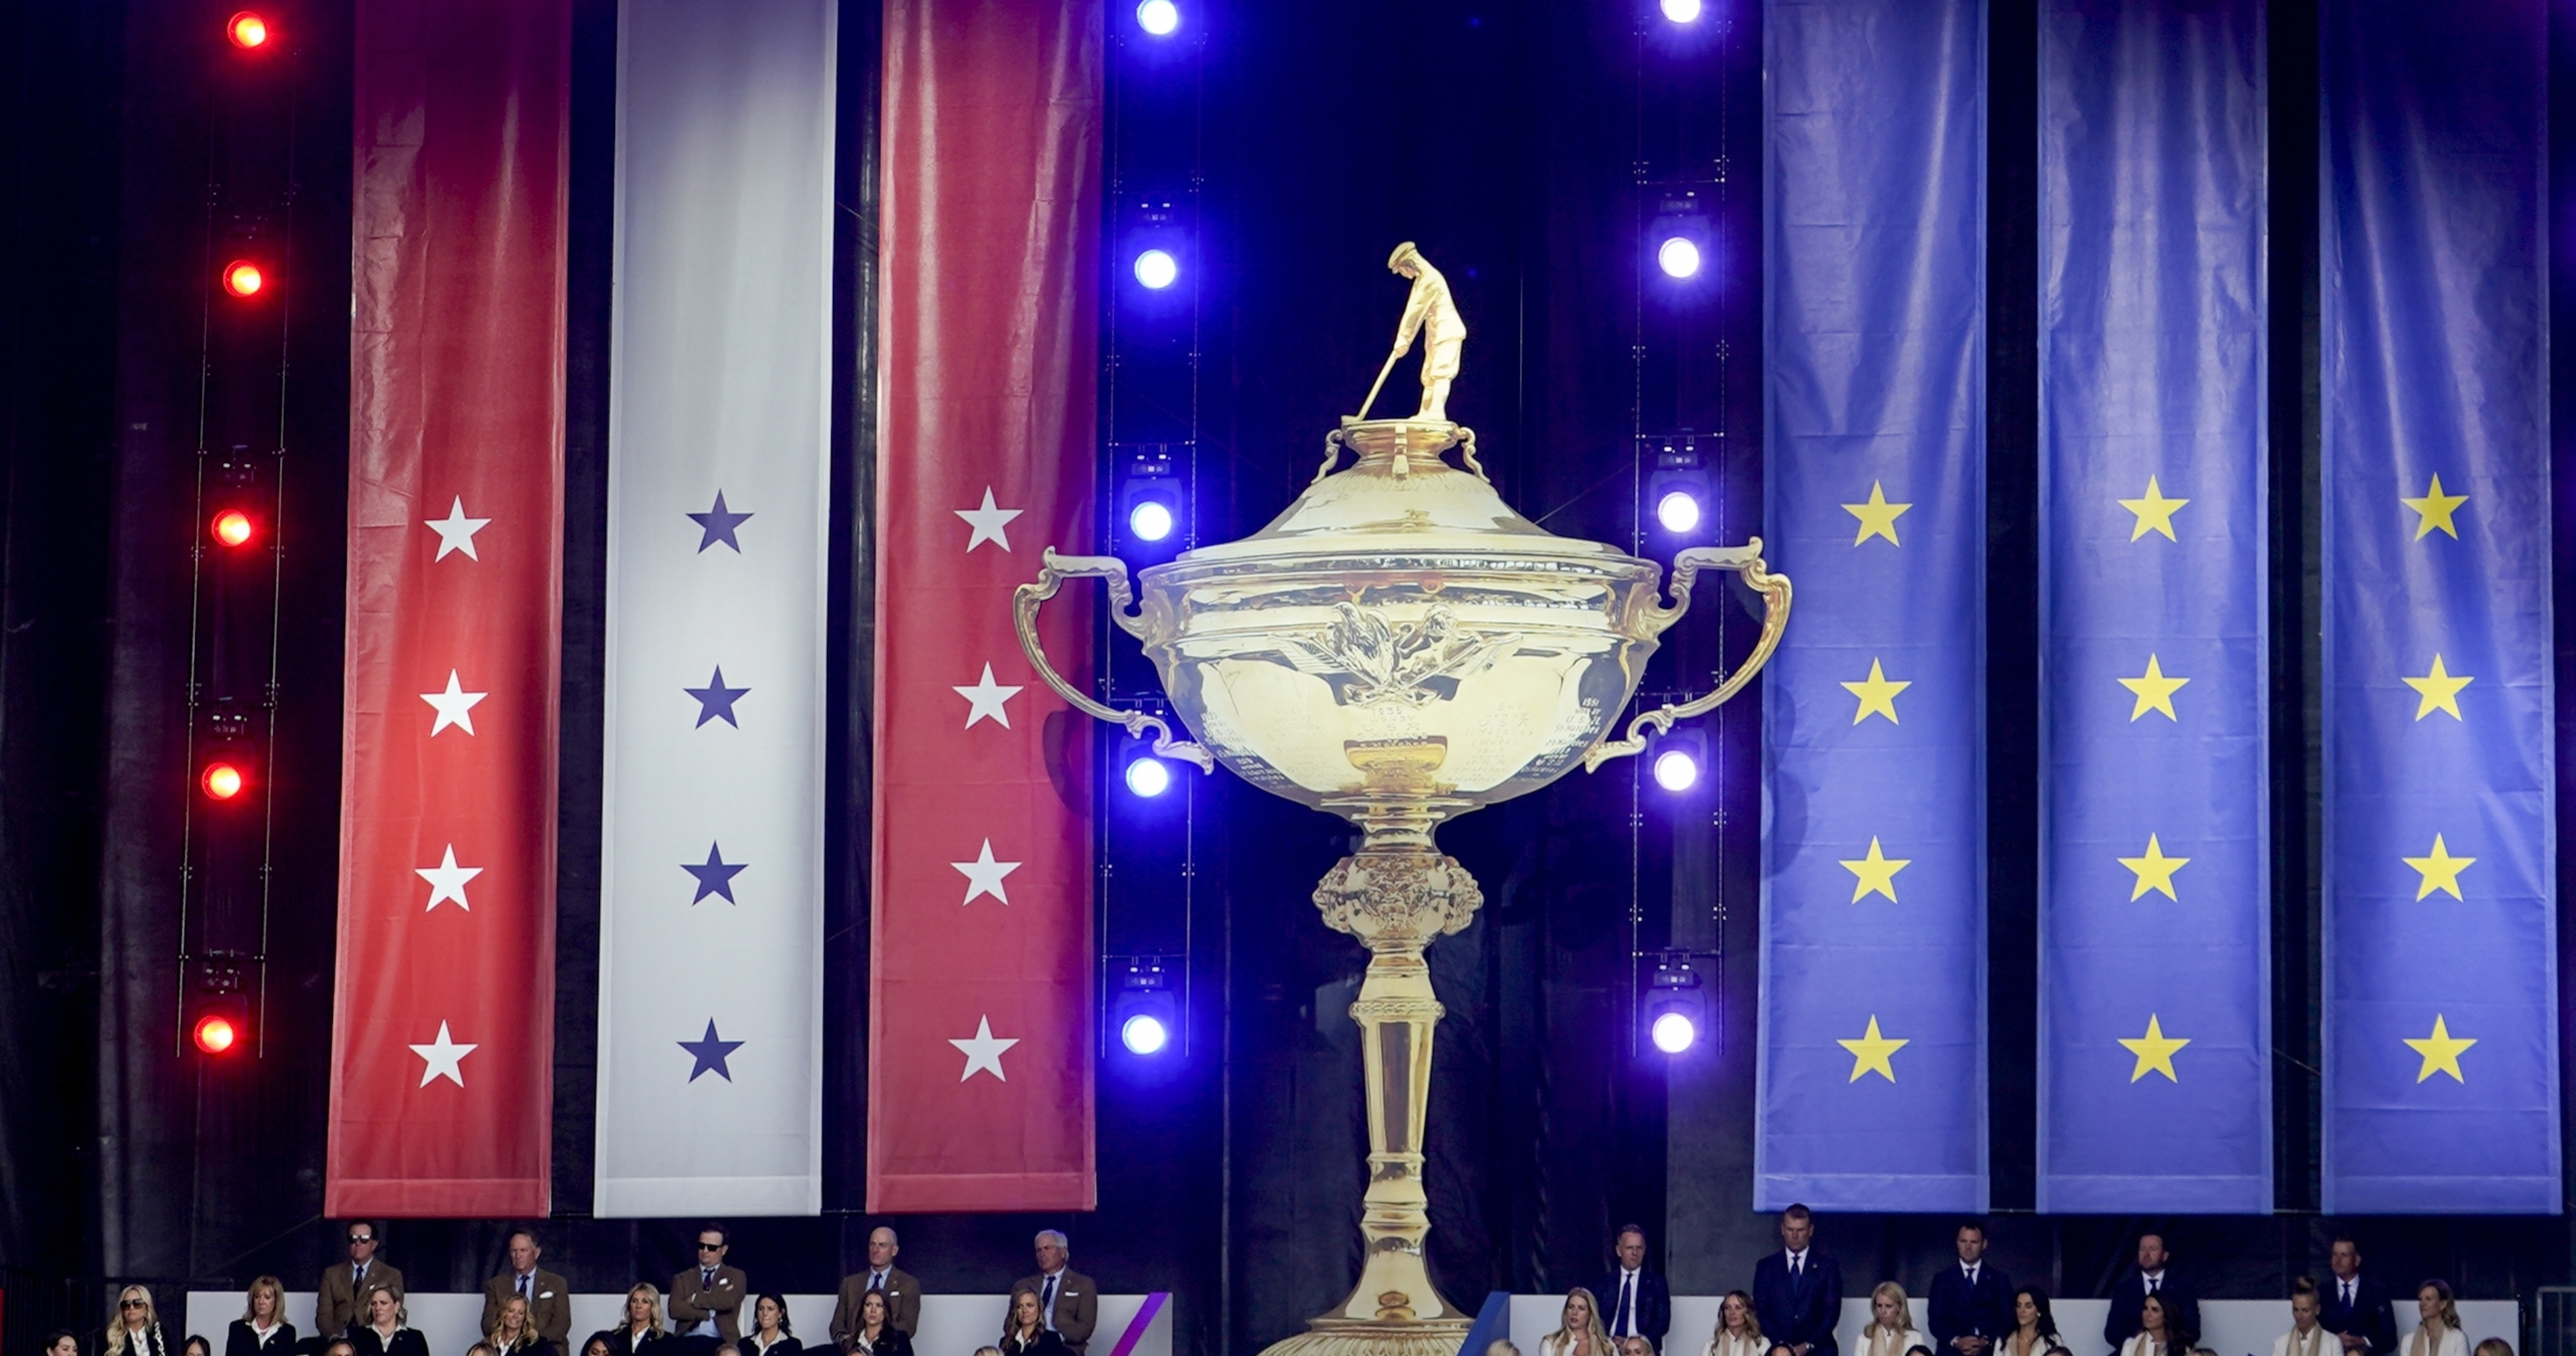 Ryder Cup 2021 Friday Tee Times, TV Schedule, Pairings and Predictions